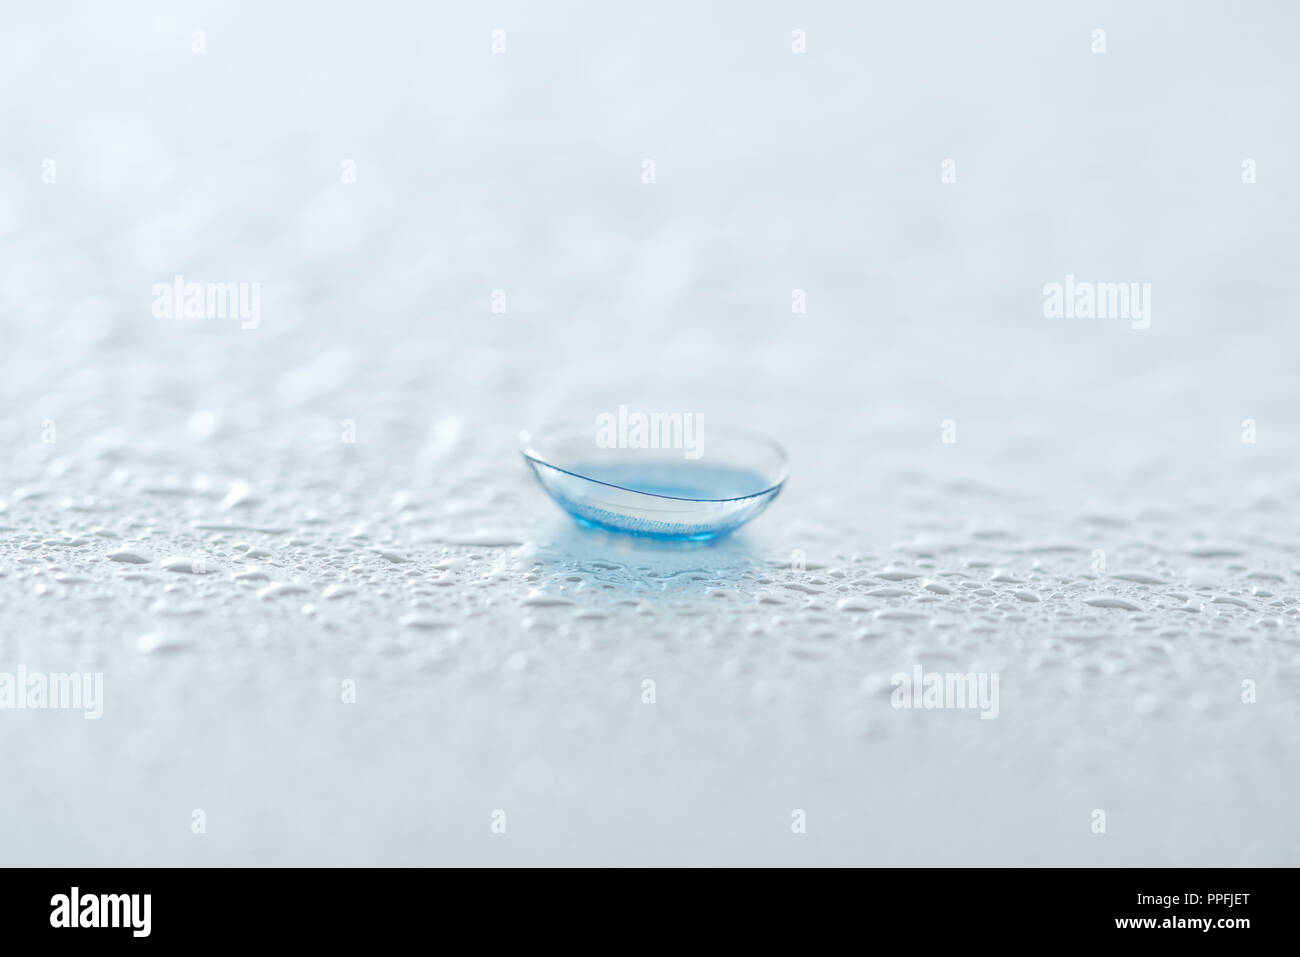 close up view of contact lense on white background with water drops Stock Photo